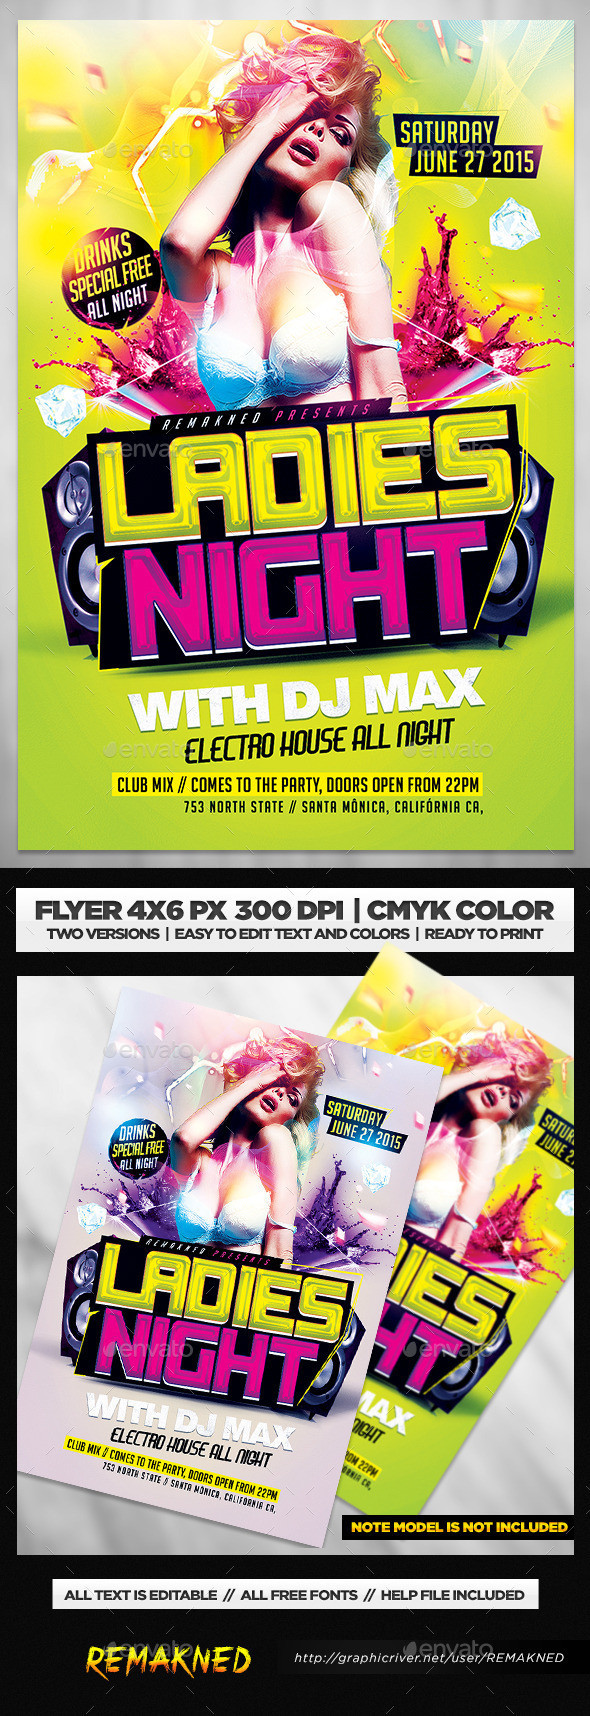 Ladies 20night 20party 20flyer 20template 20psd